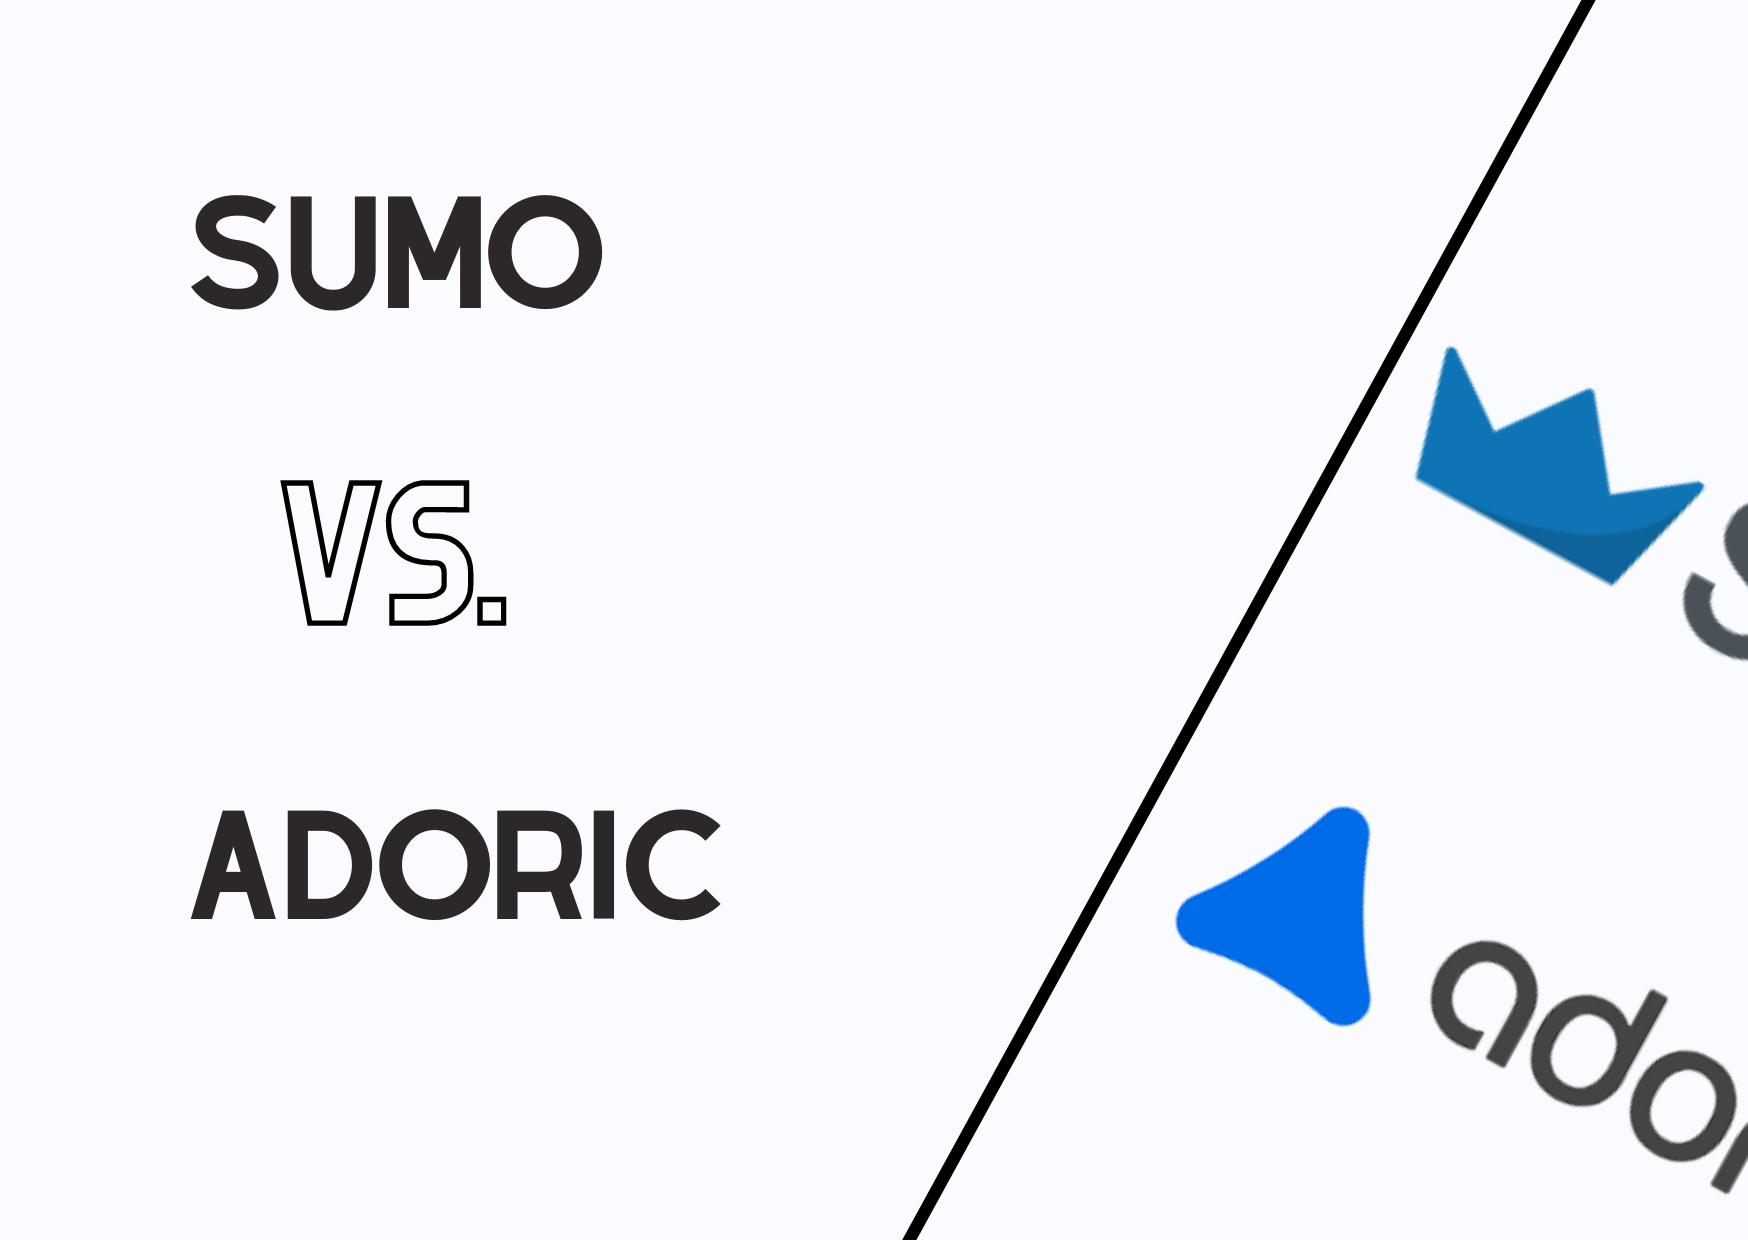 the banner of Sumo and Adoric comparison 